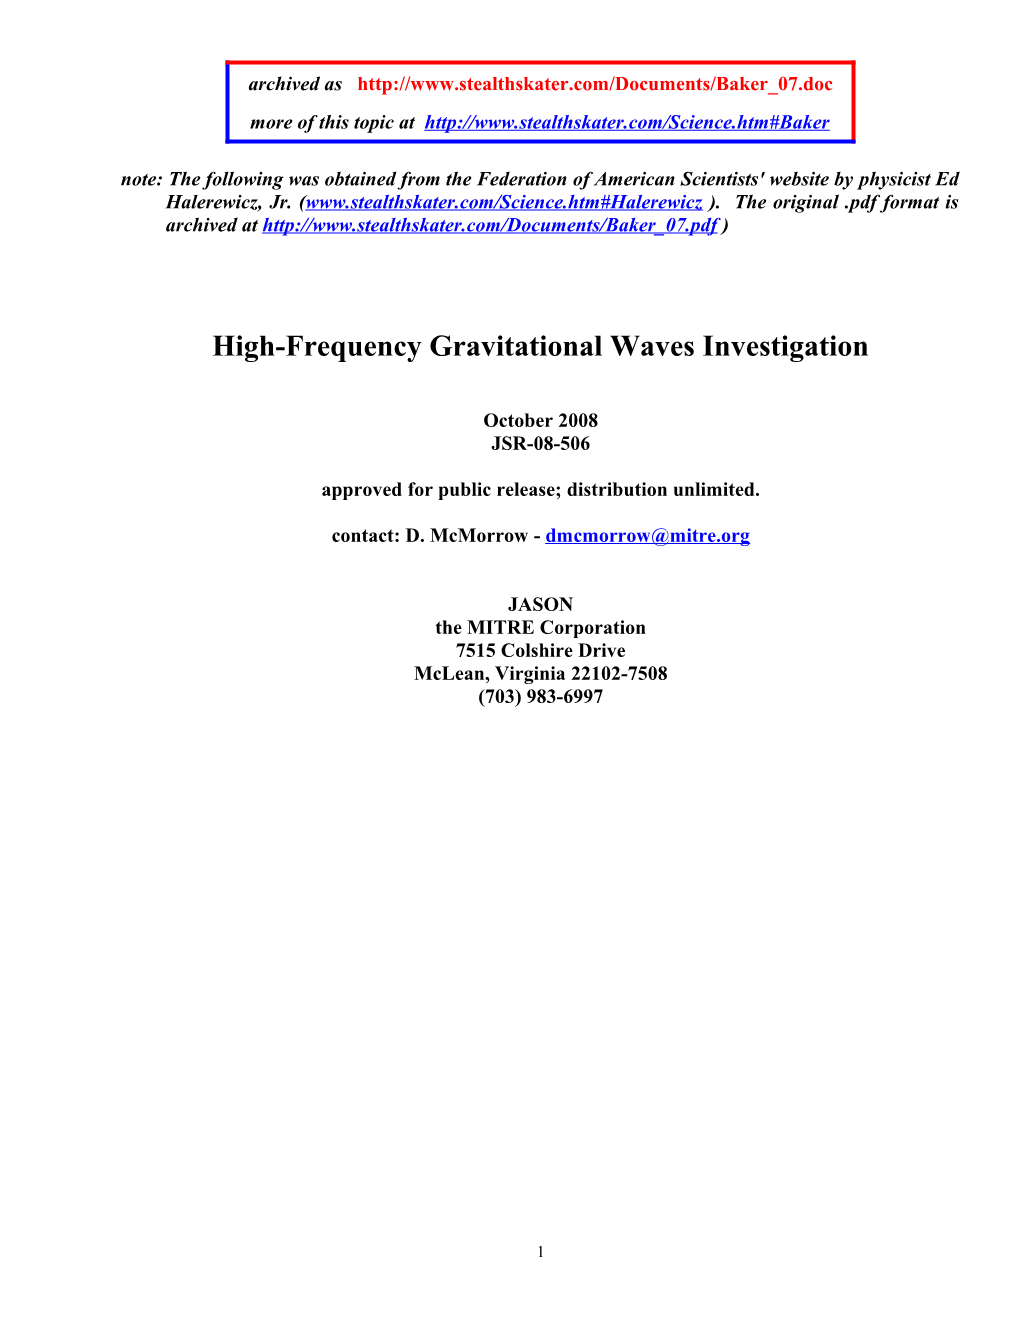 High-Frequency Gravitational Waves Investigation